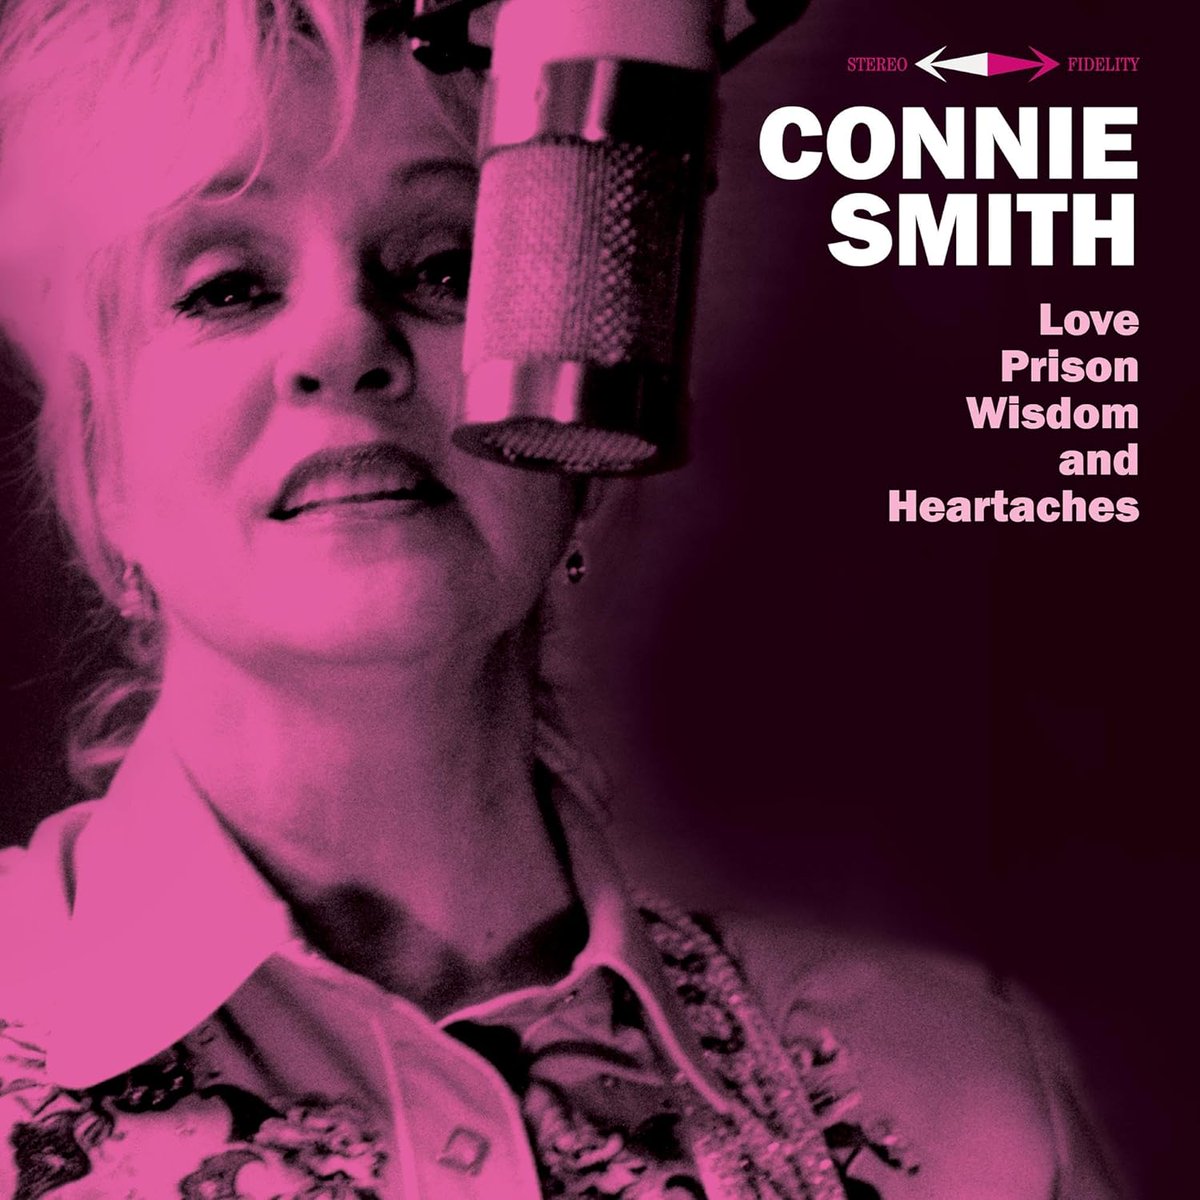 Connie Smith returns with Love, Prison, Wisdom And Heartaches. Produced by her musical partner @martystuarthq, it's a heartfelt tribute to the legends of country music who’ve influenced her over the years. @RealConnieSmith @FatPossum @orchtweets newreleasesnow.com/album/connie-s…